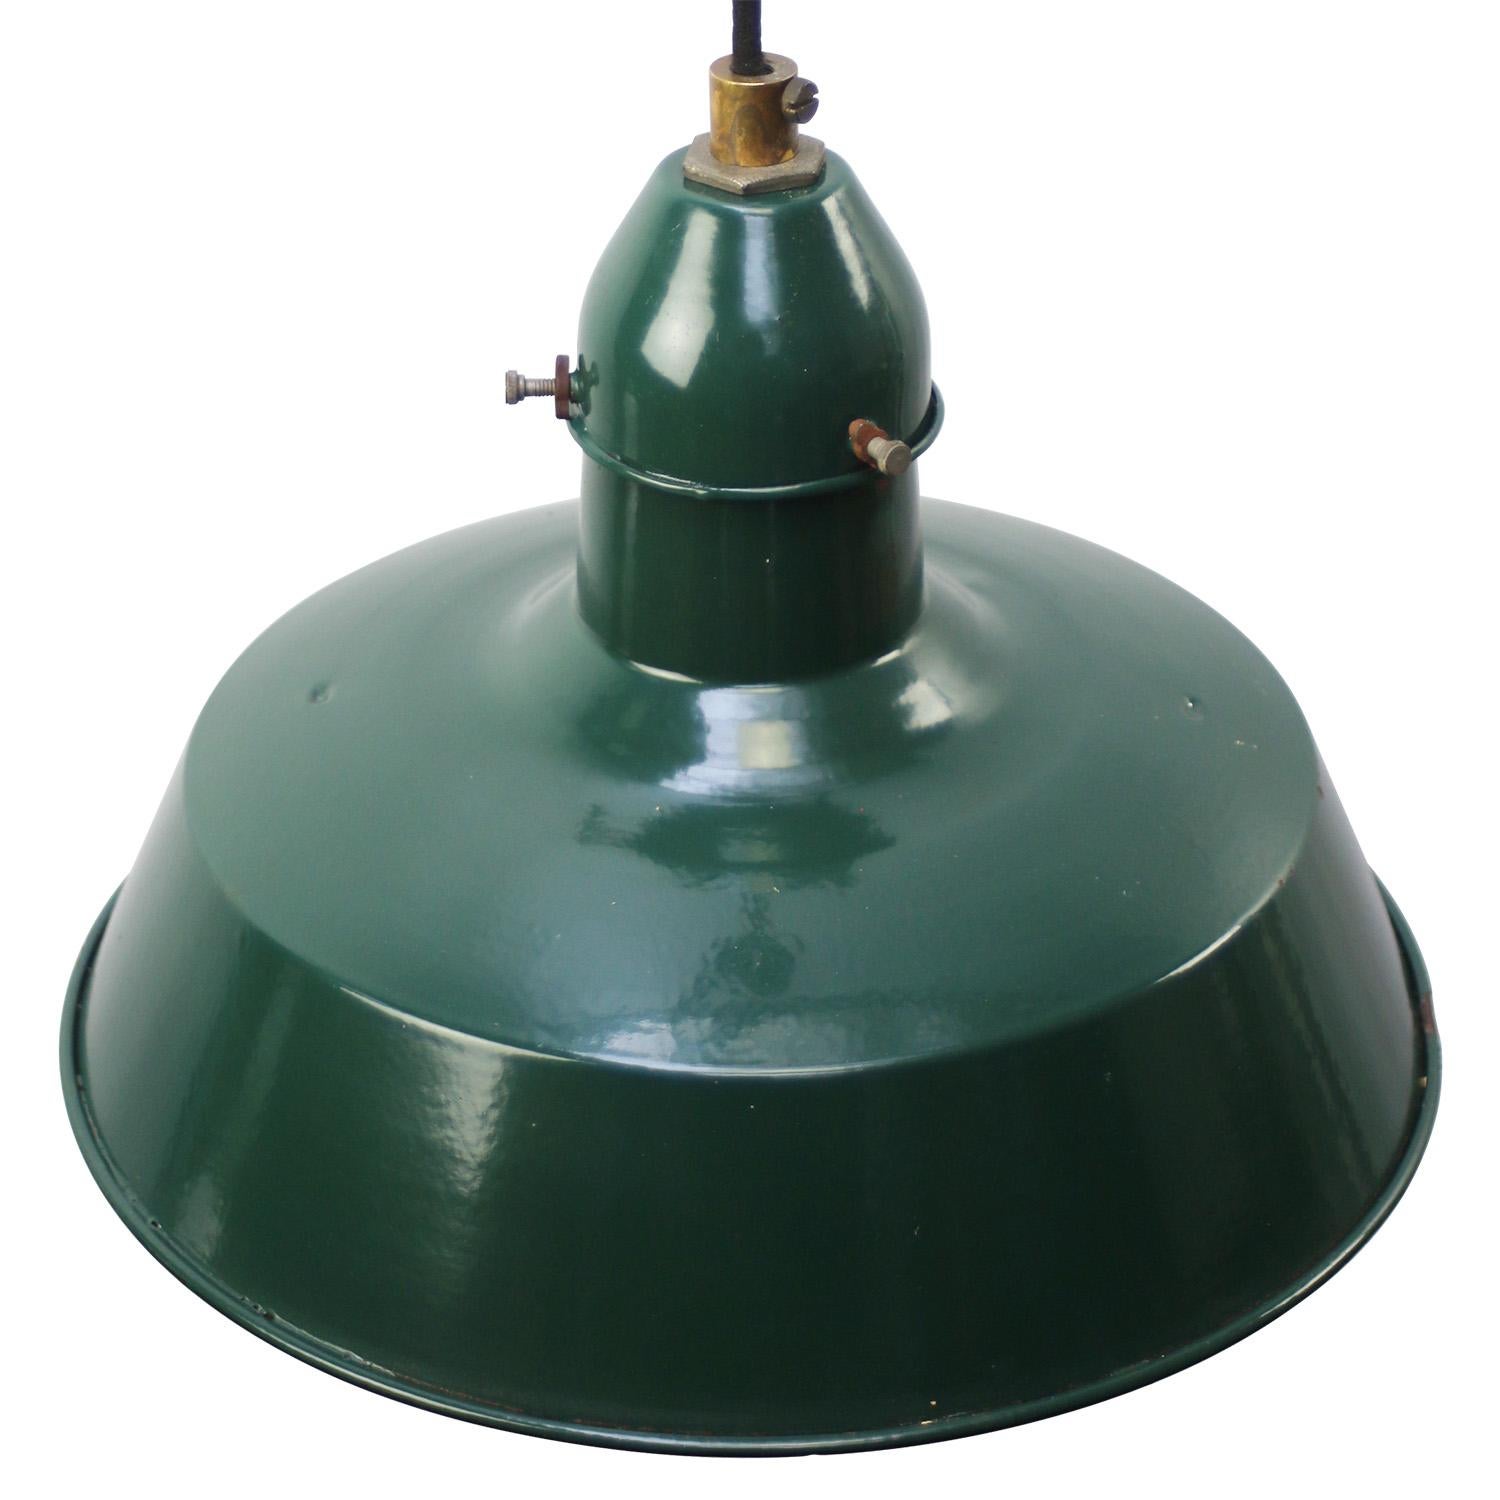 French factory pendant by Sammode, France
dark petrol green enamel white interior
Brass top

Weight: 1.30 kg / 2.9 lb

Priced per individual item. All lamps have been made suitable by international standards for incandescent light bulbs,